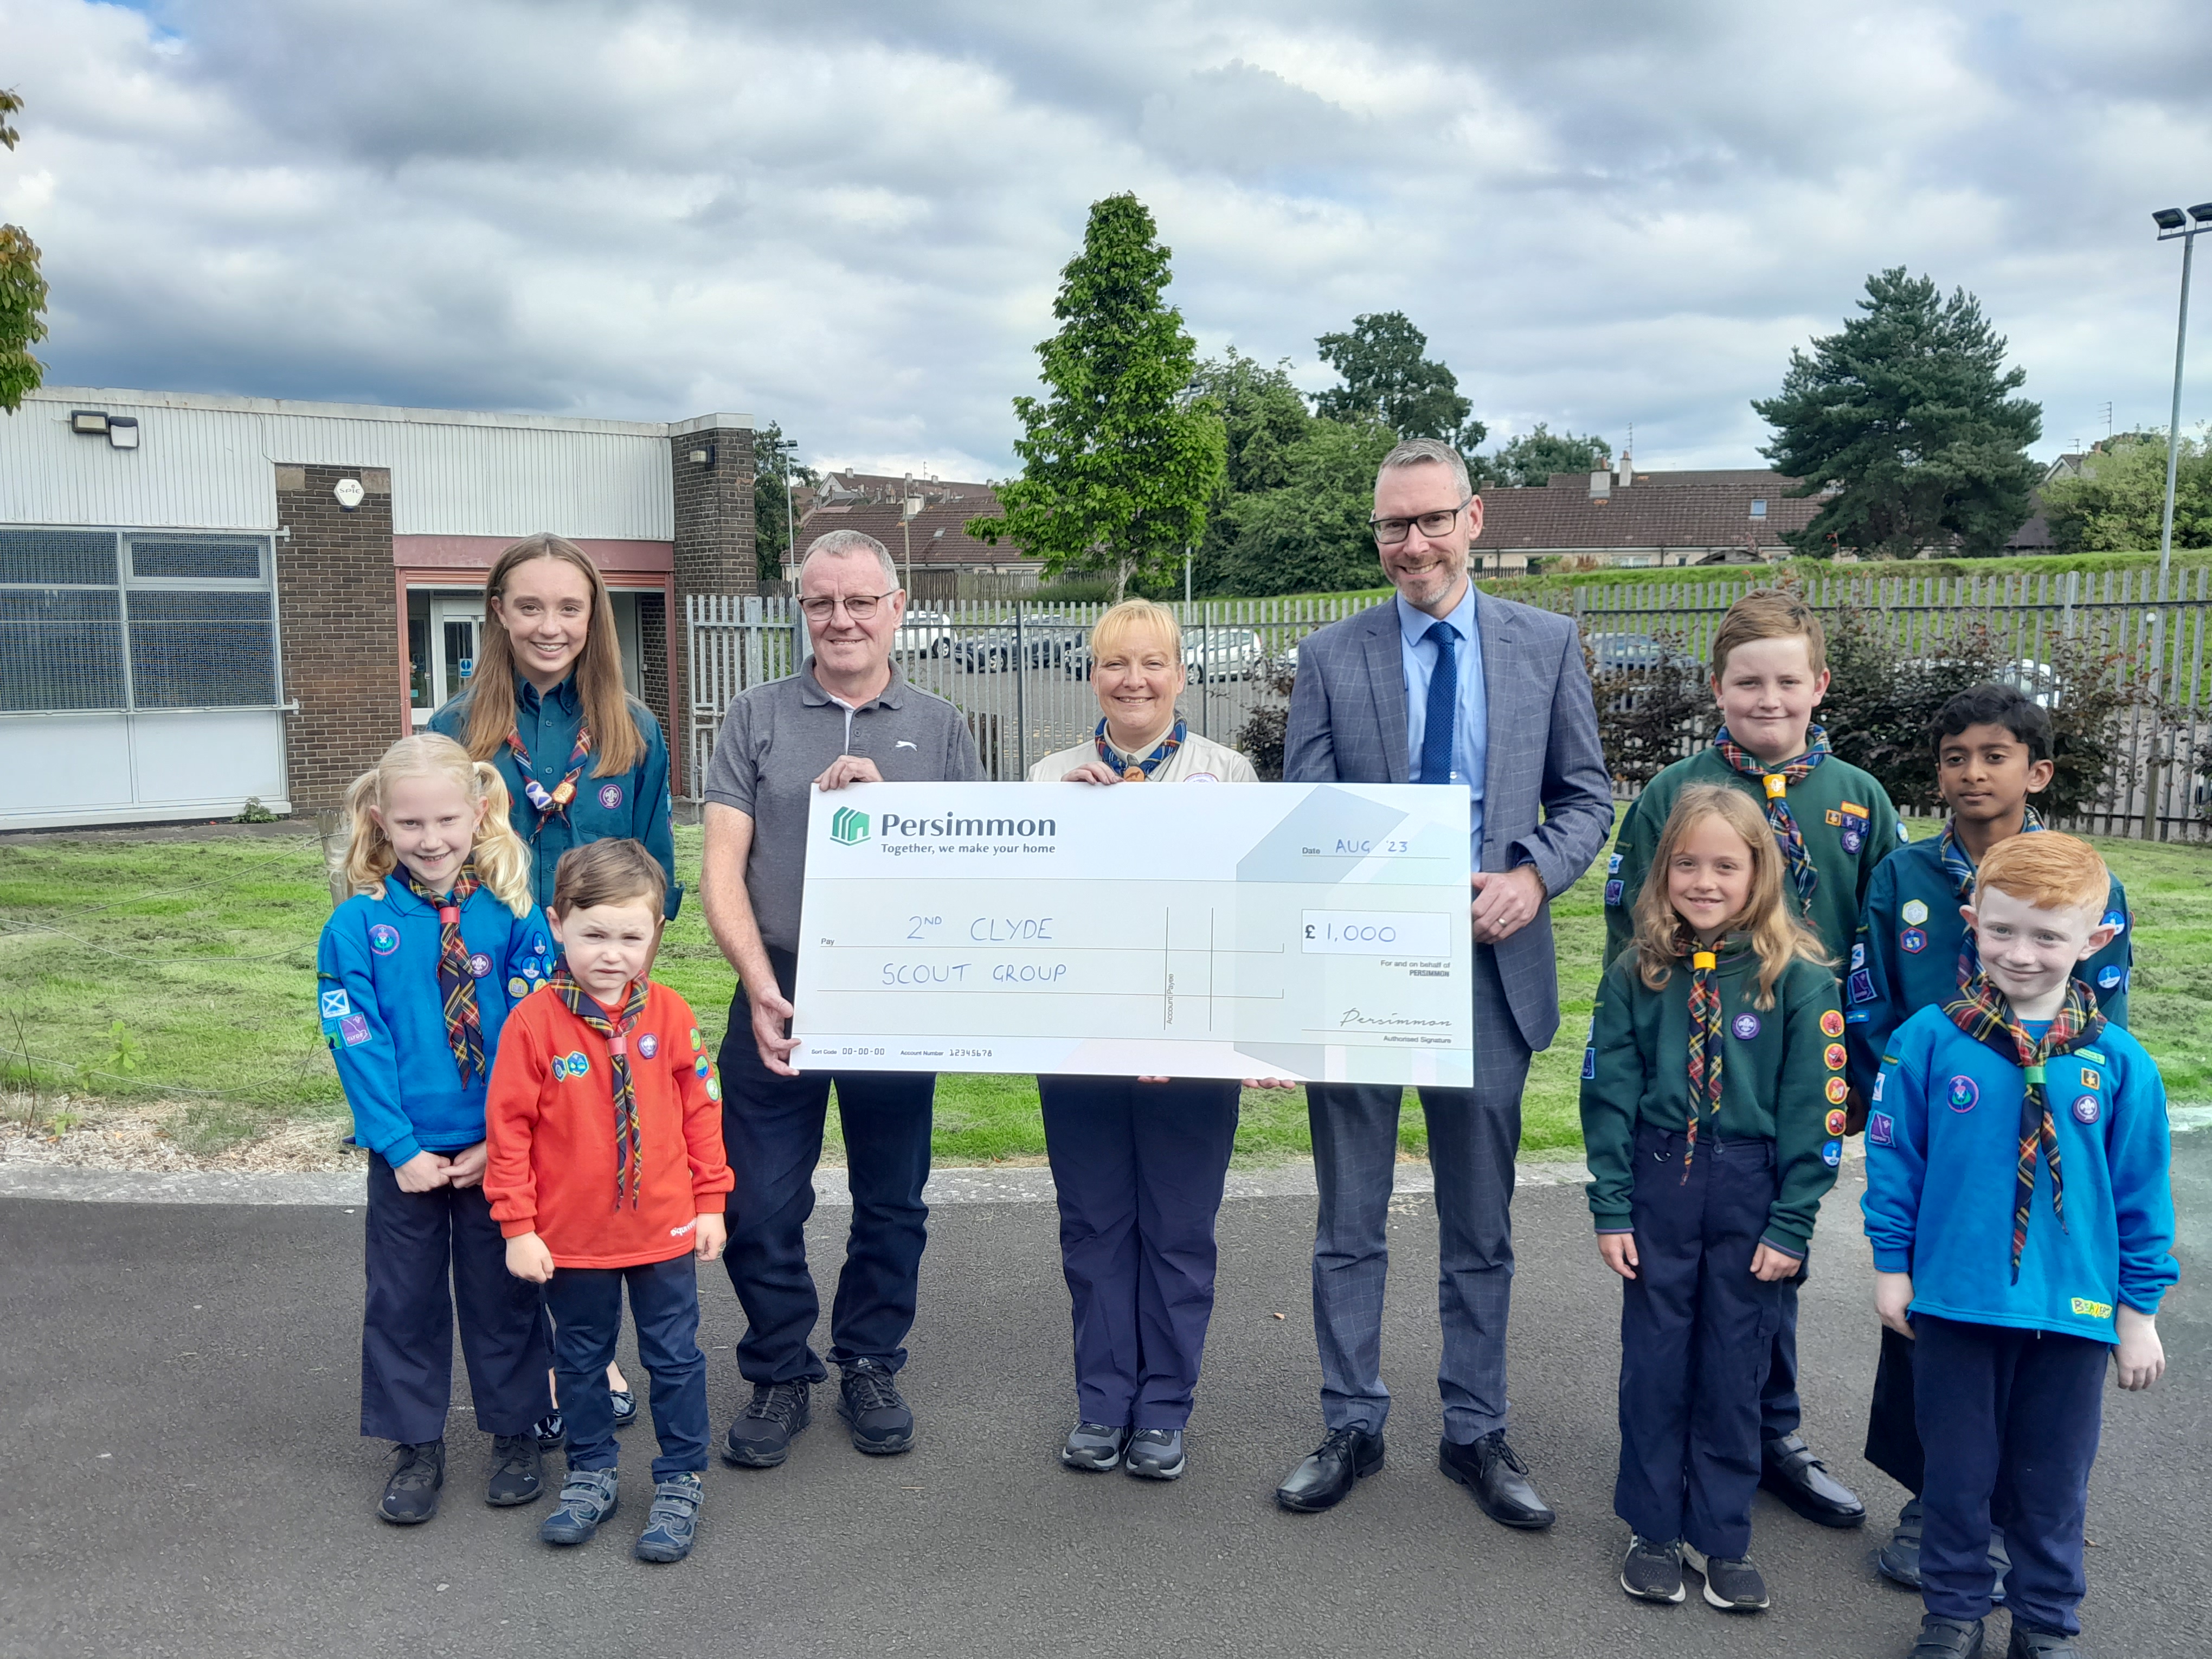 Scouts honoured with £1,000 donation from Persimmon West Scotland